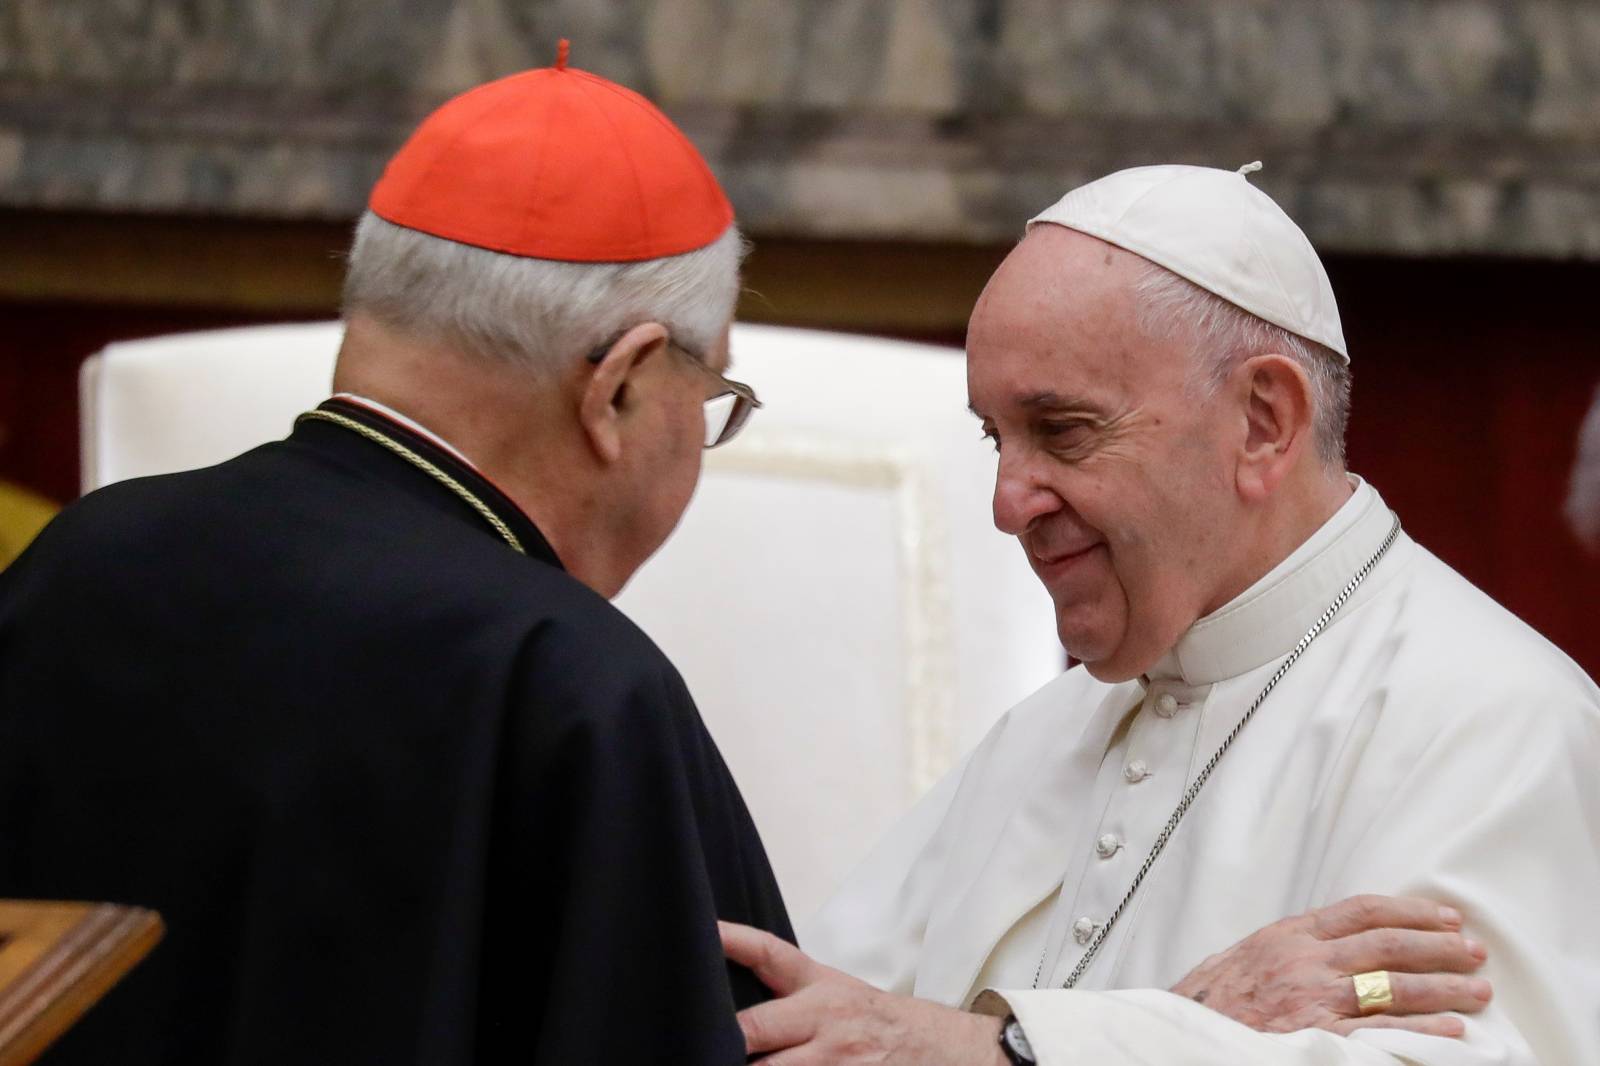 Pope Francis greets Cardinal Angelo Sodano on the occasion of his traditional greetings to the Roman Curia in the Sala Clementina (Clementine Hall) of the Apostolic Palace, at the Vatican